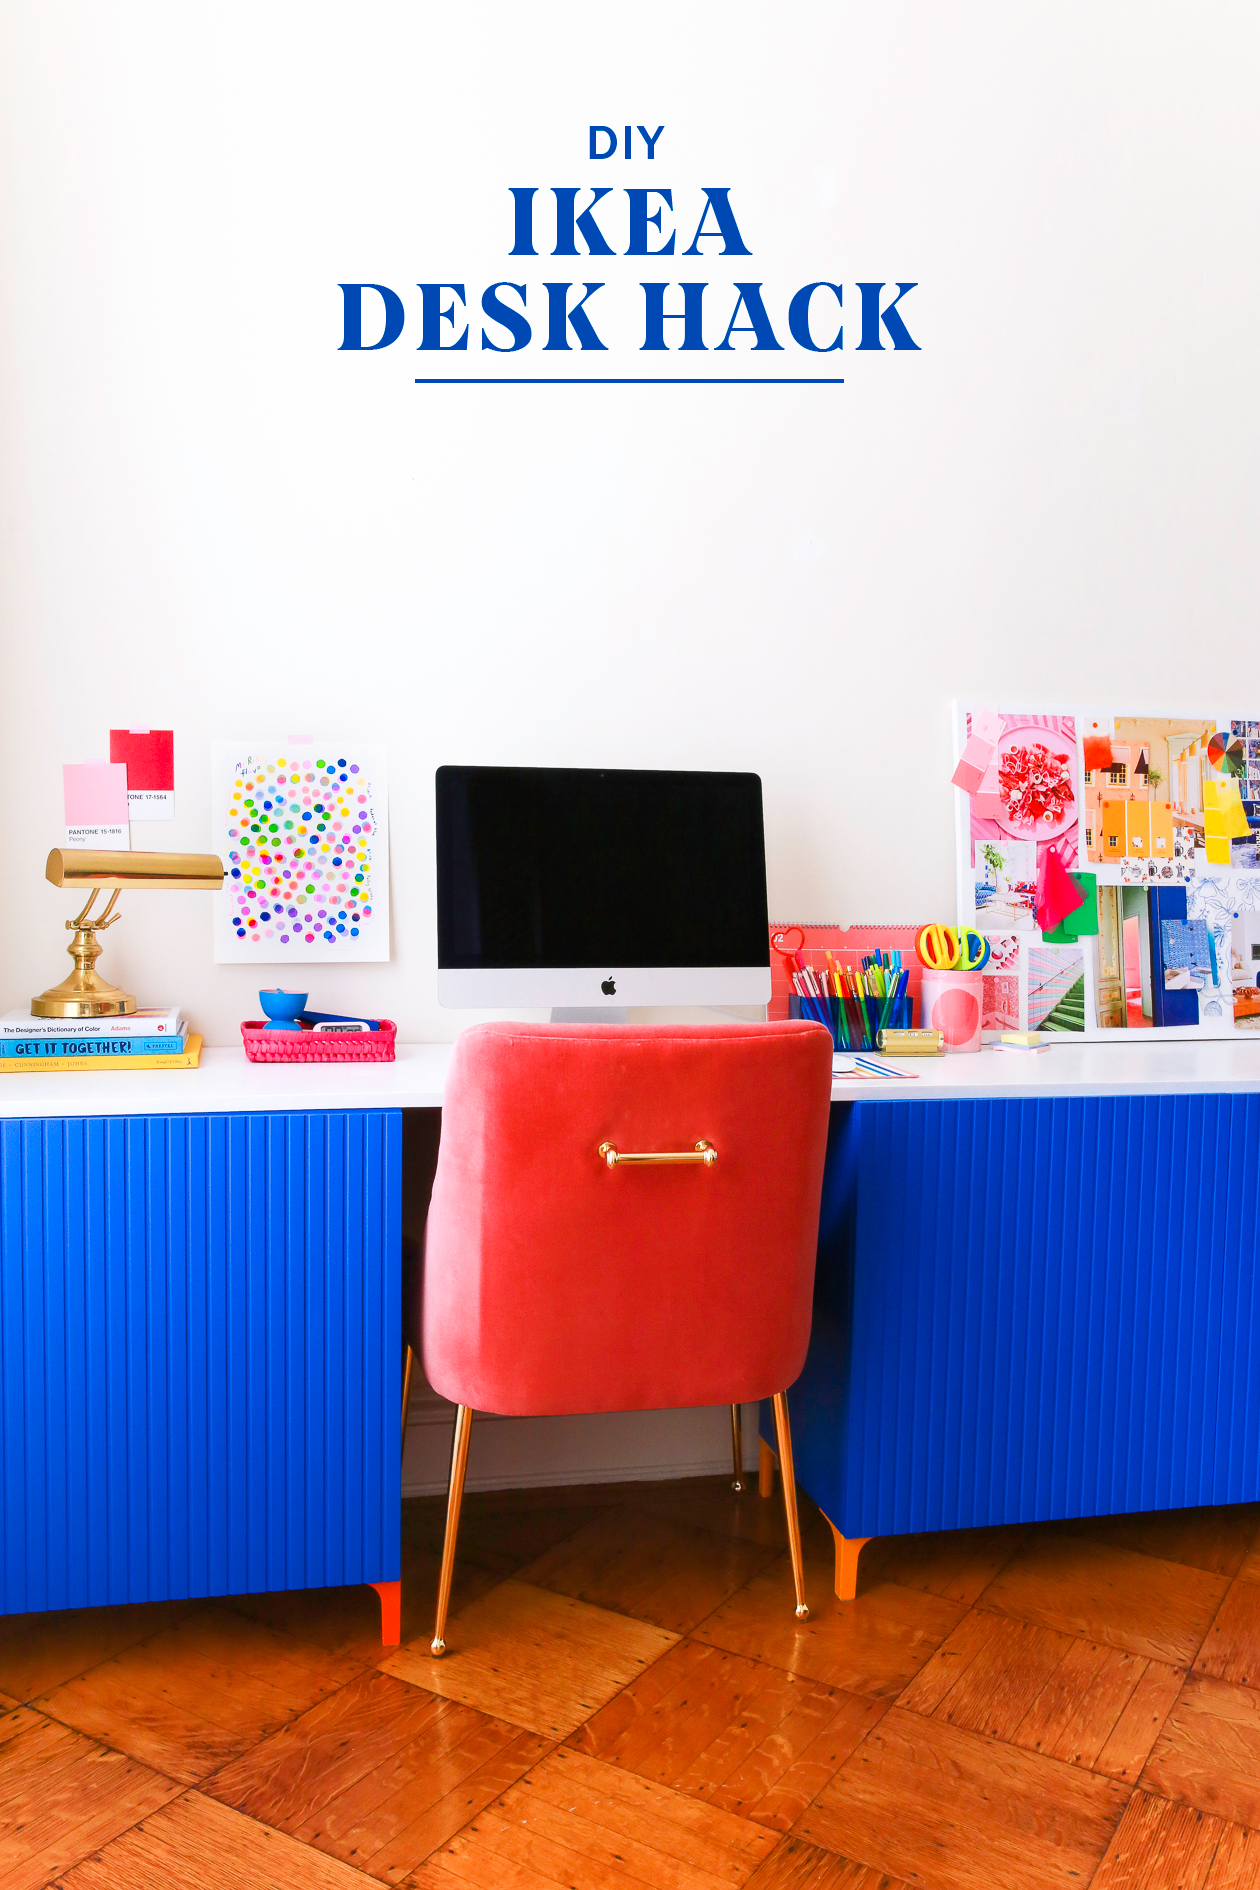 A DIY Ikea Desk Hack that anyone can make! You can make this Ikea Desk hack even if you don't have power tools. With a few simple Ikea items, wood, and paint, you can make a custom desk to fit your home office!